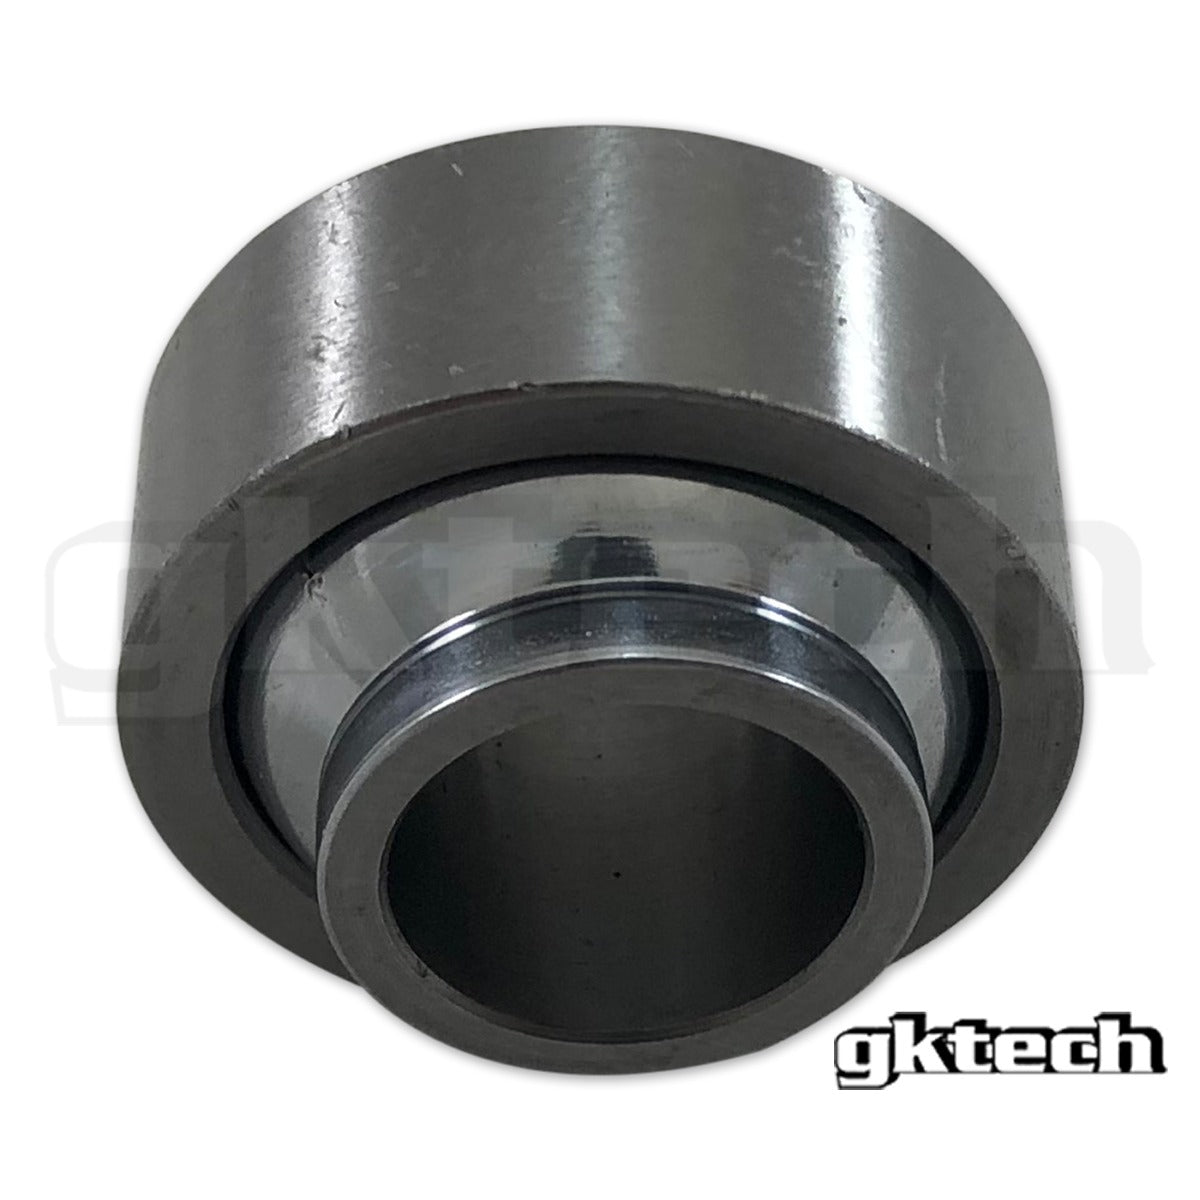 Replacement YPB12T ball joint bearing